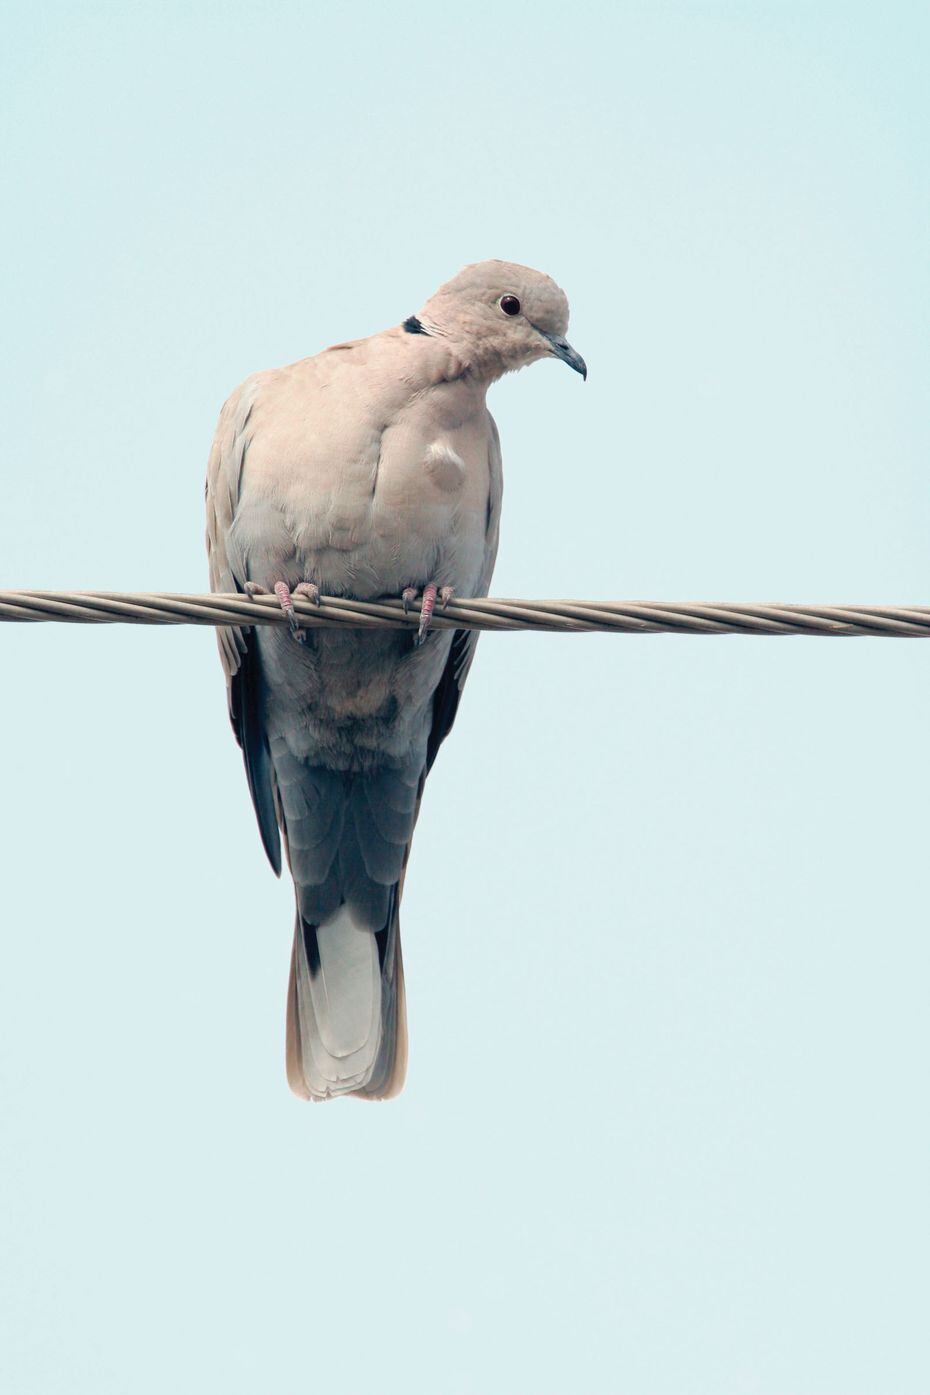 The Eurasian collared dove is an exotic species that does not count toward your daily limit...